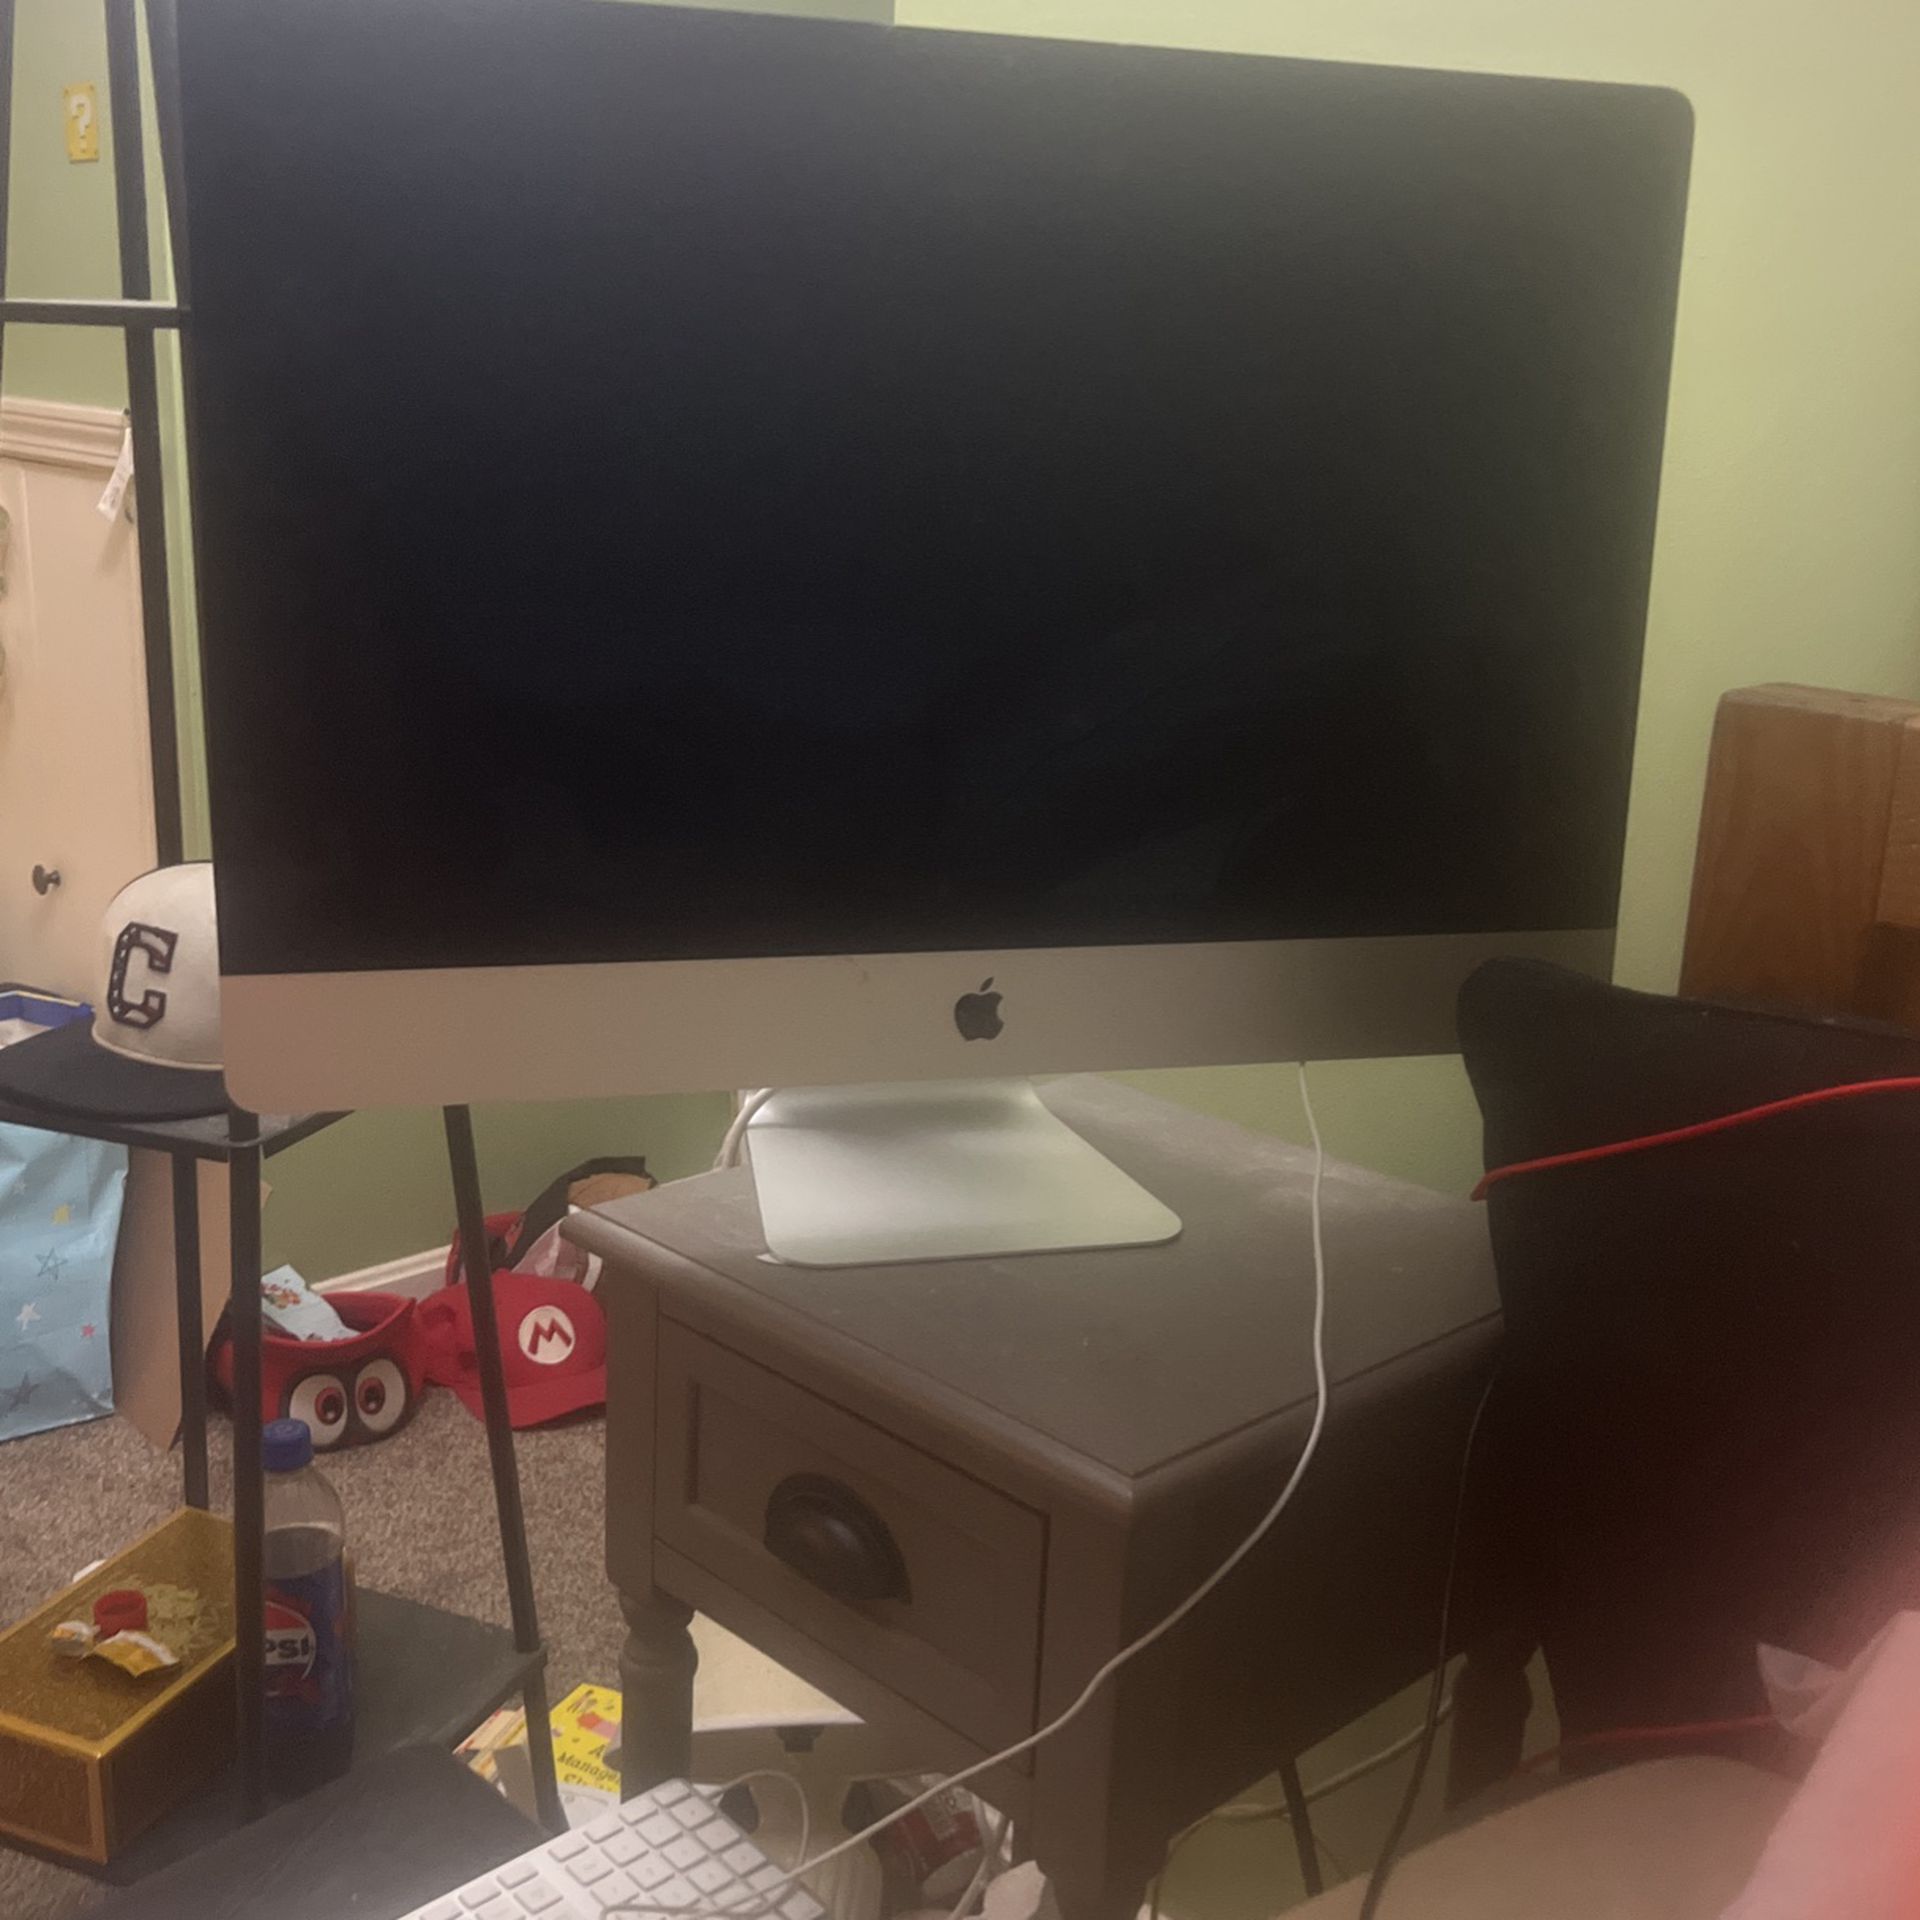 2019 iMac Computer With Wireless Mouse And Keyboard 